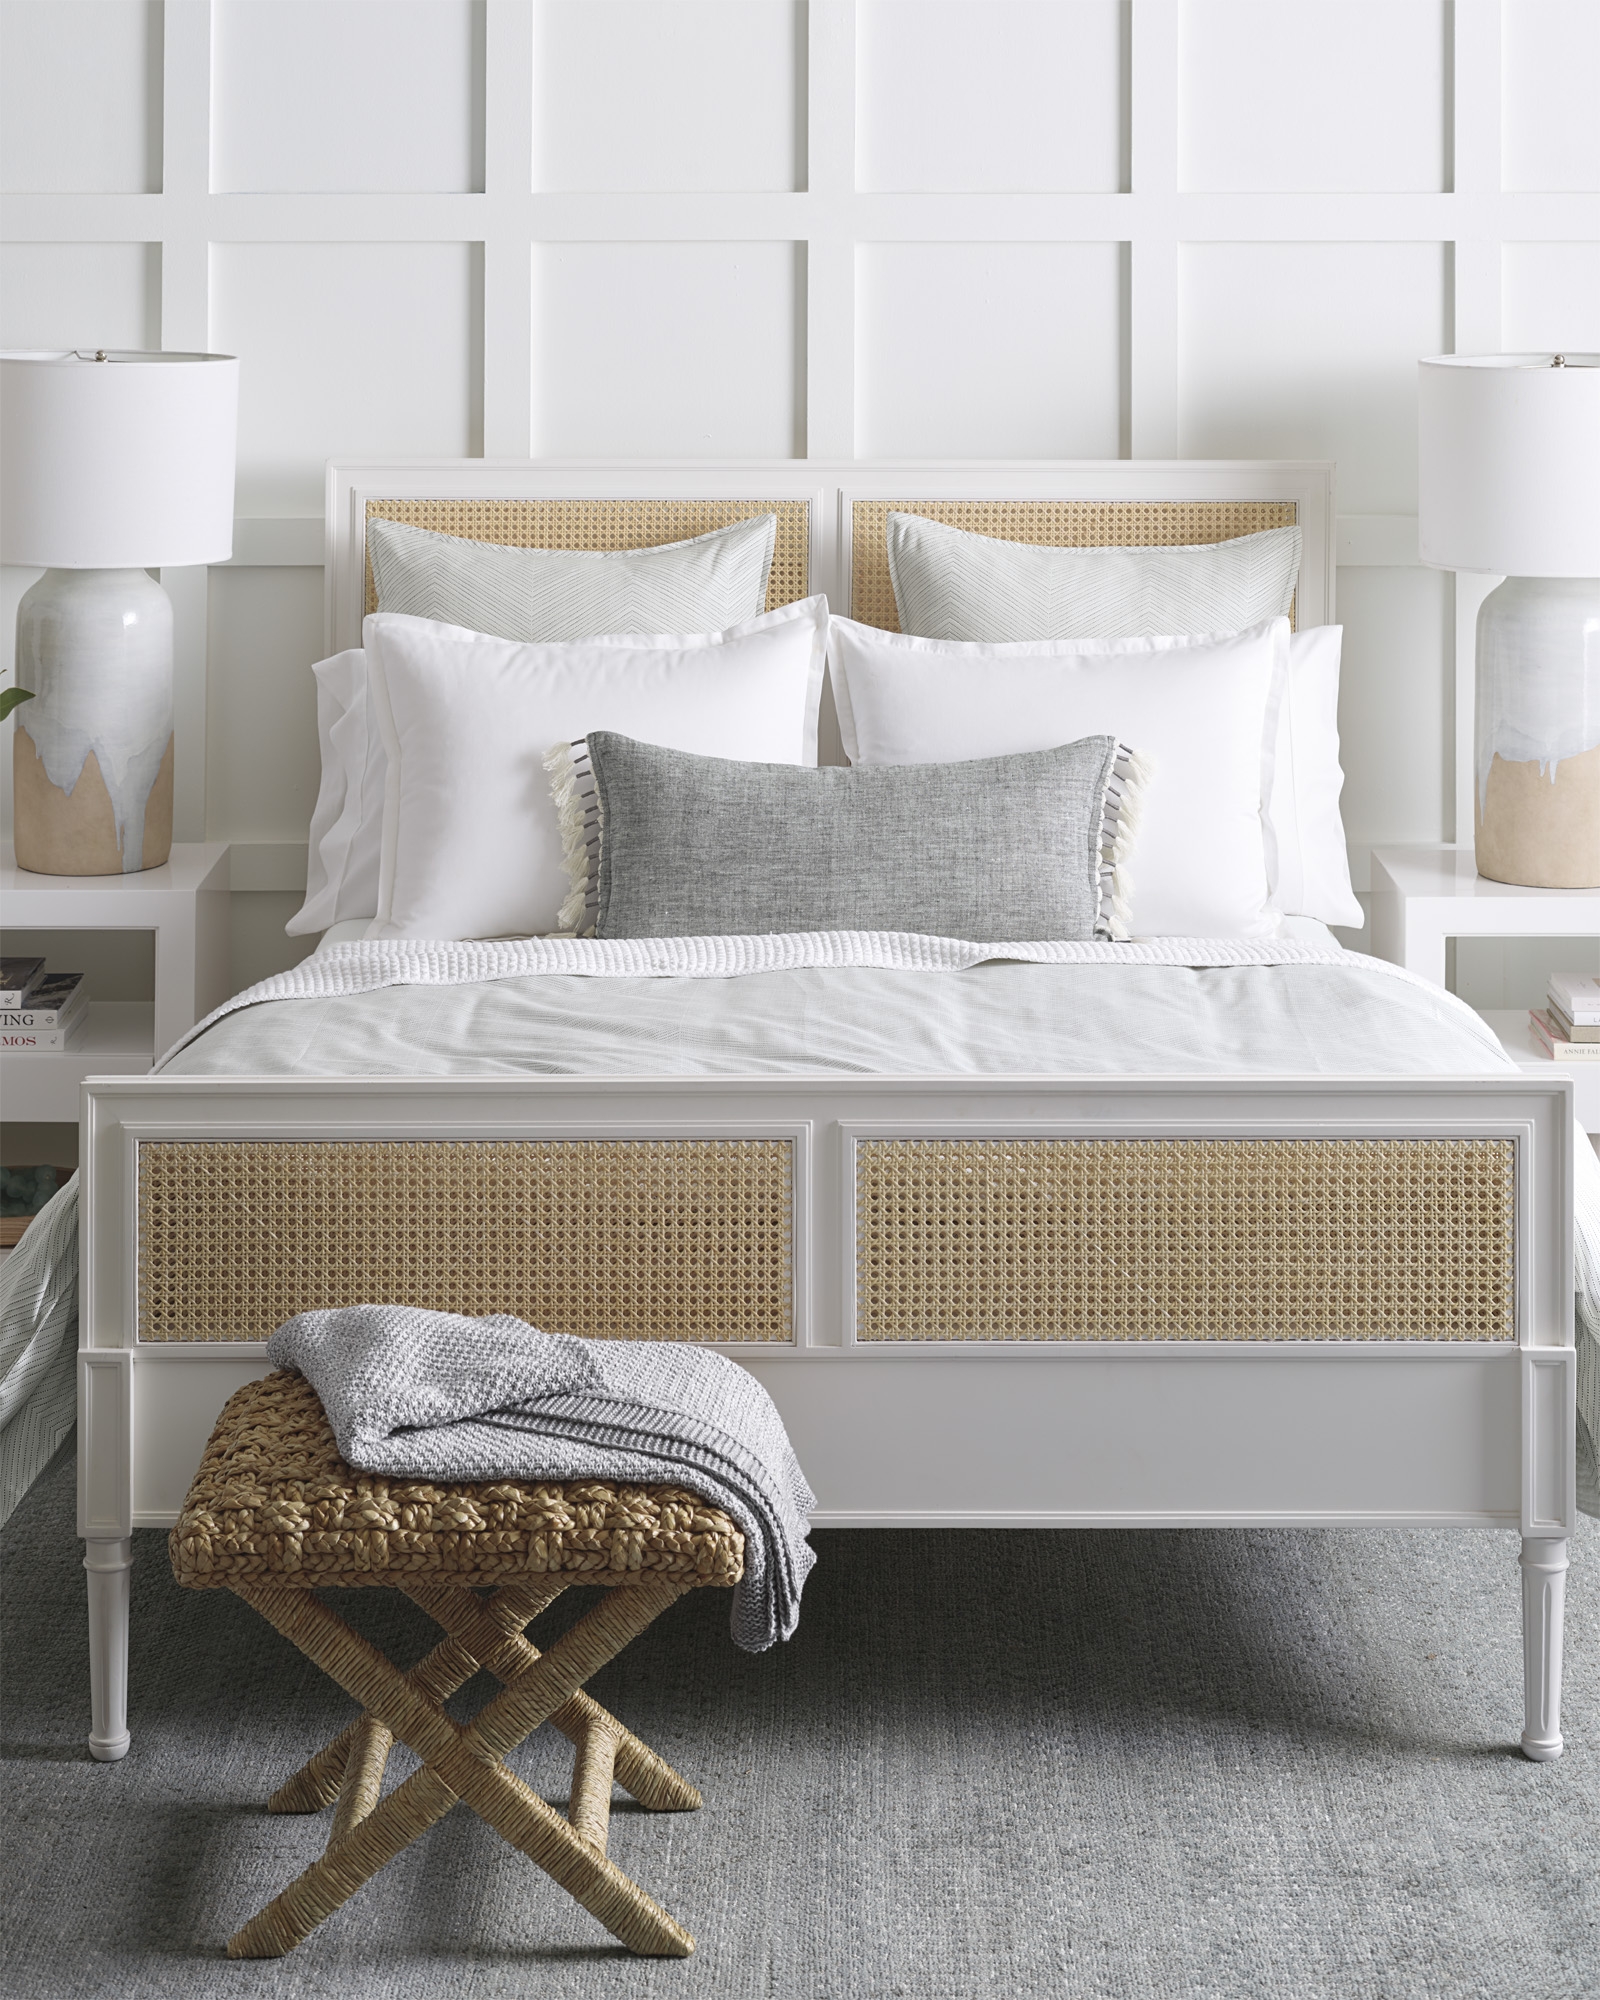 Harbour Cane King Bed - White - Image 4